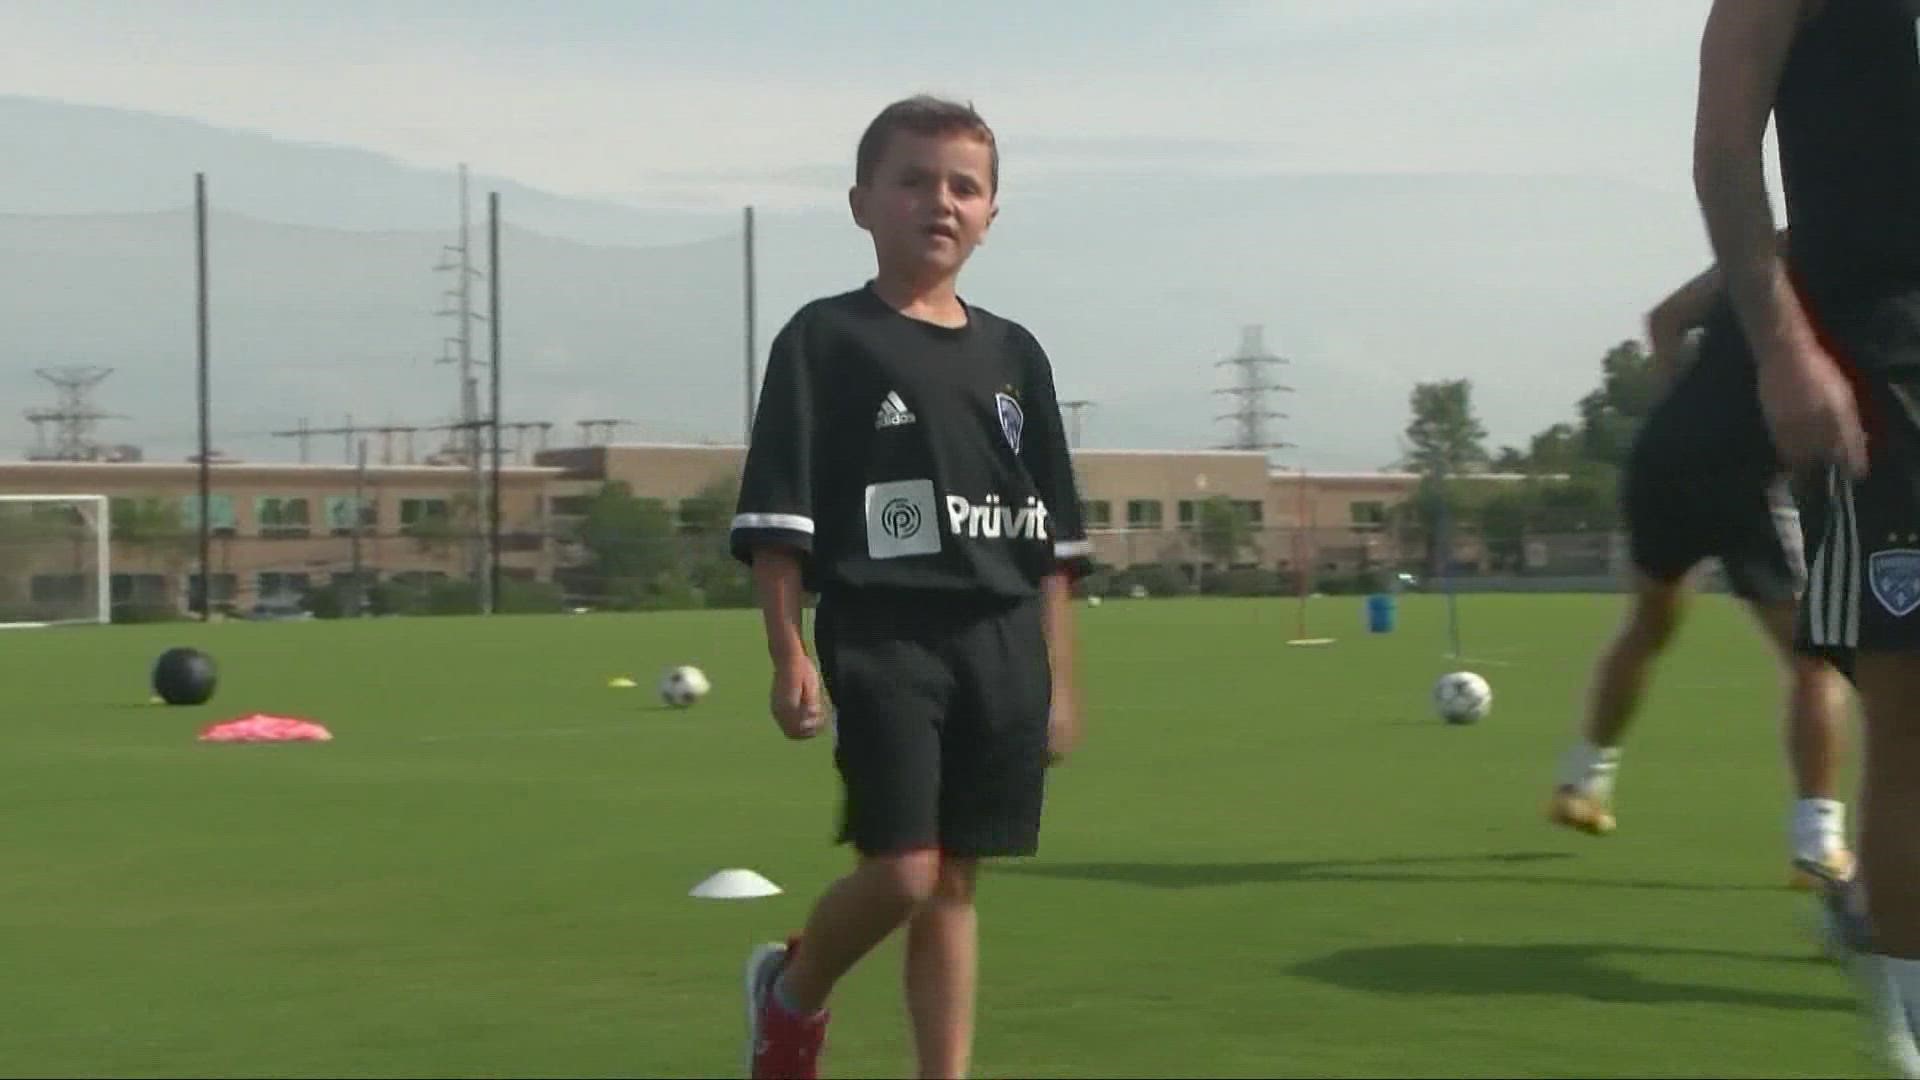 Today's Show Us Something Good comes from Louisville, where an 8-year-old in remission from cancer had a very special day with his favorite soccer team.